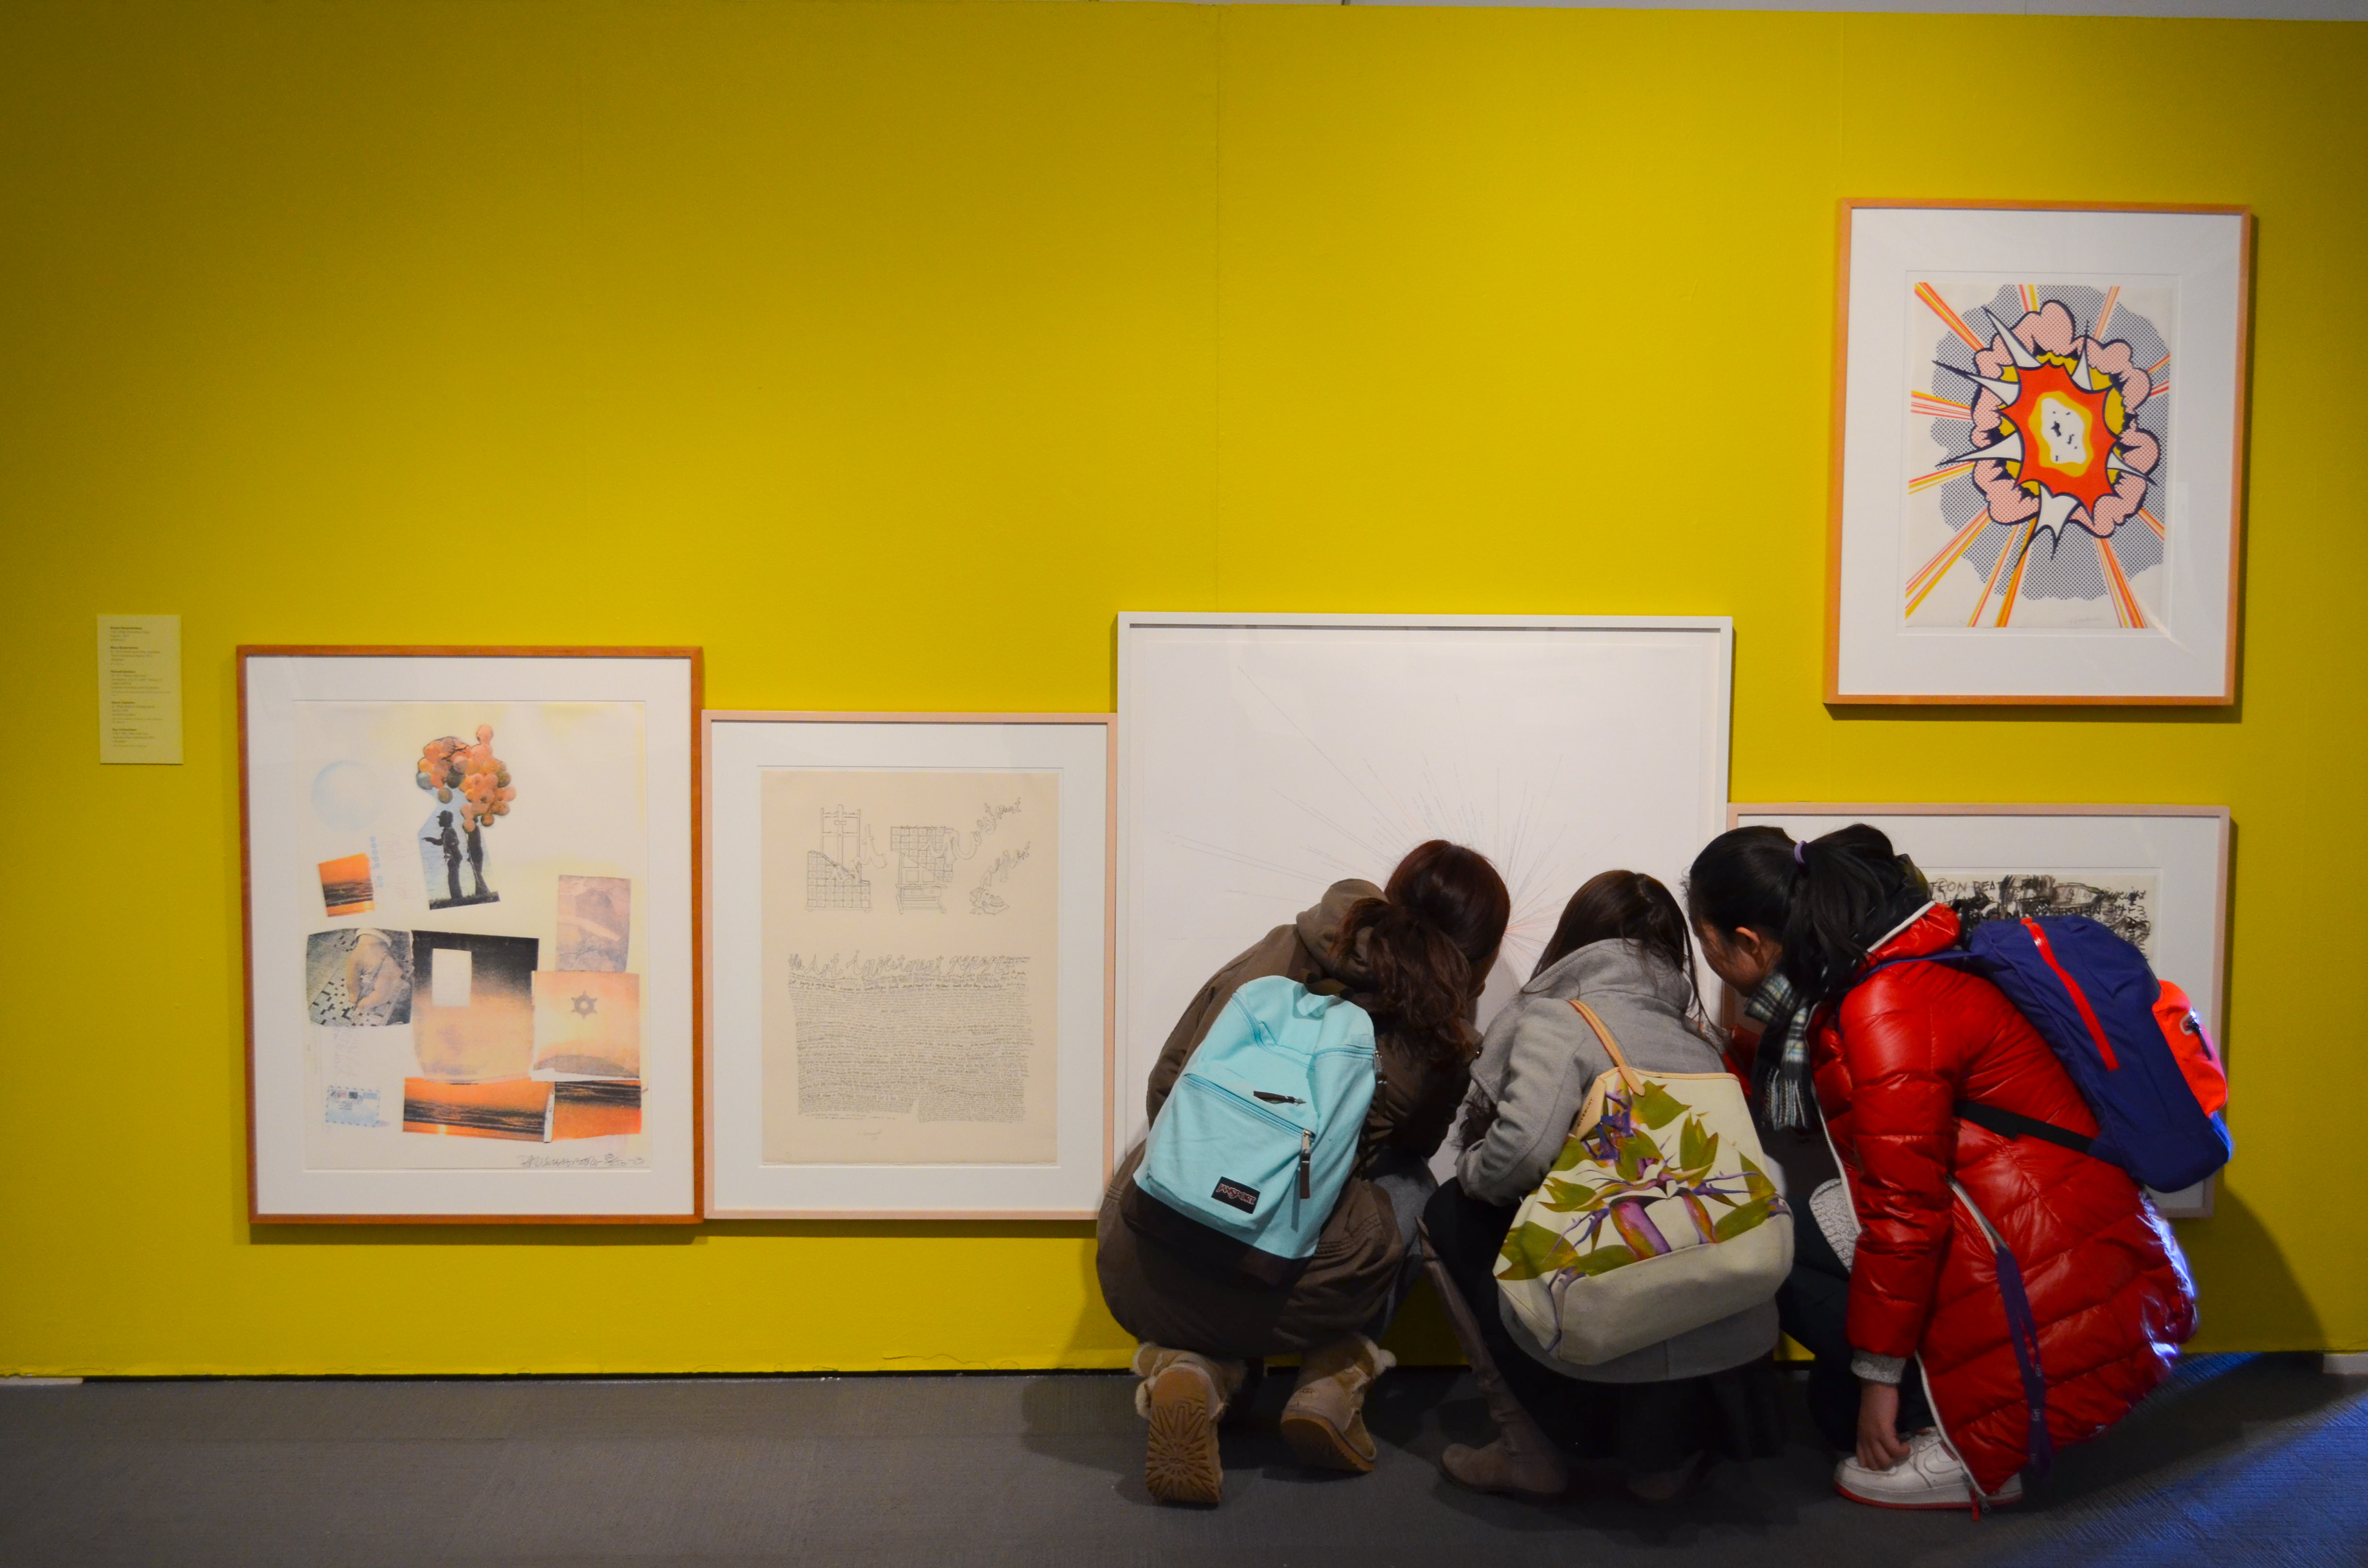 Students bending down looking closely at art in art museum